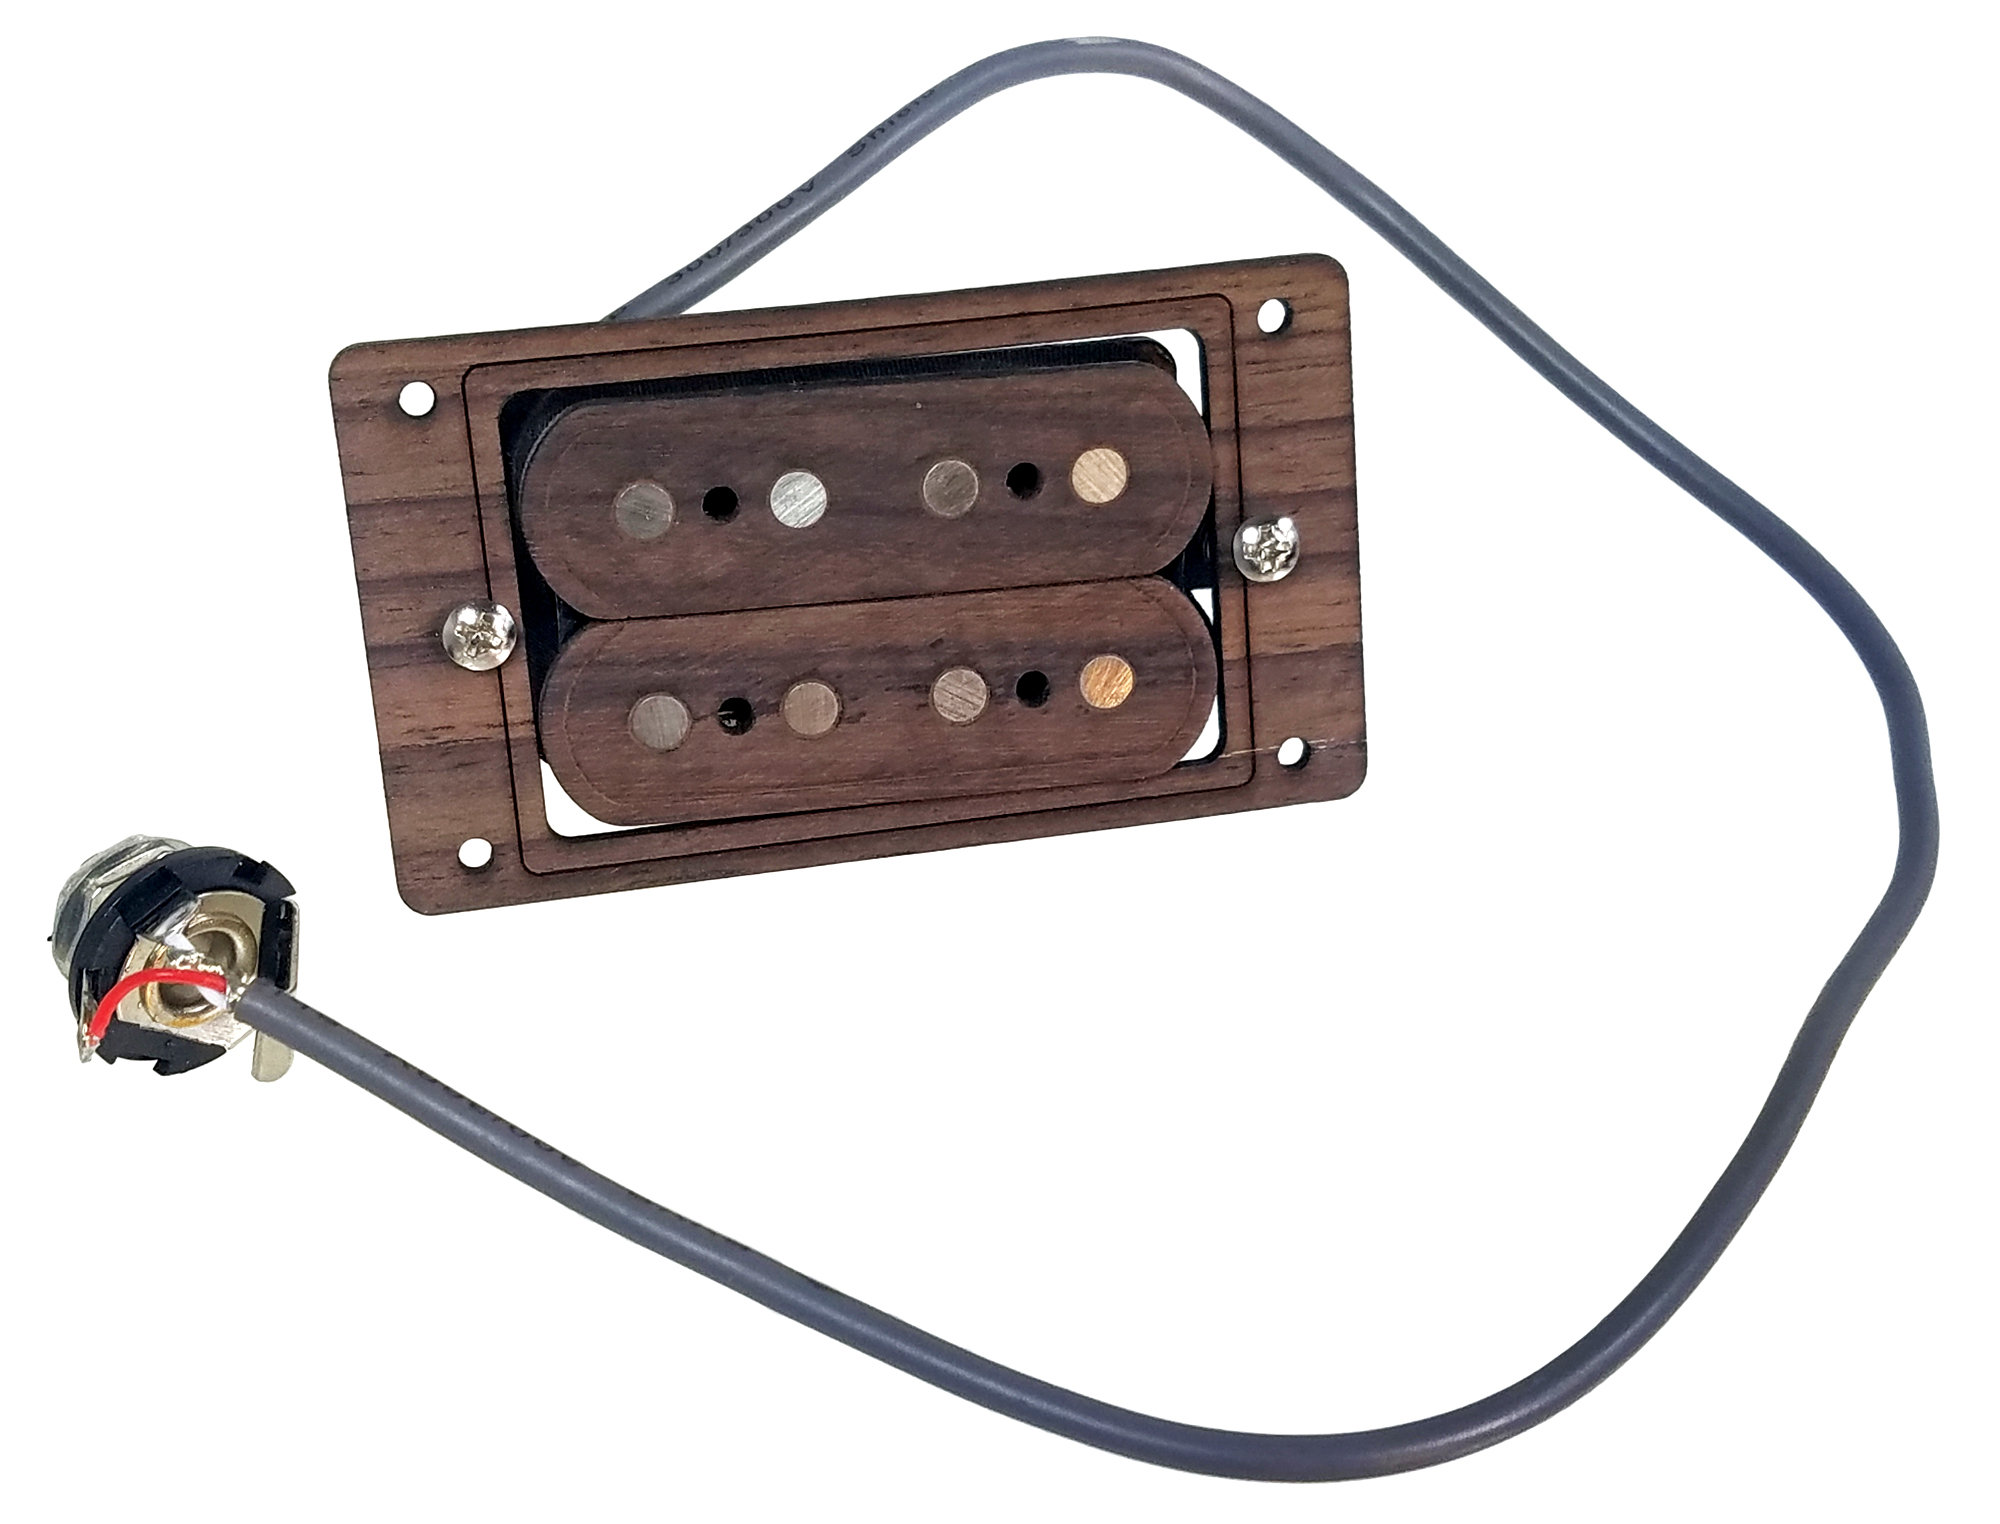 "DeltaBucker" 4-string Rosewood Cigar Box Guitar Humbucker Pickup pre-wired with Jack - No Soldering!